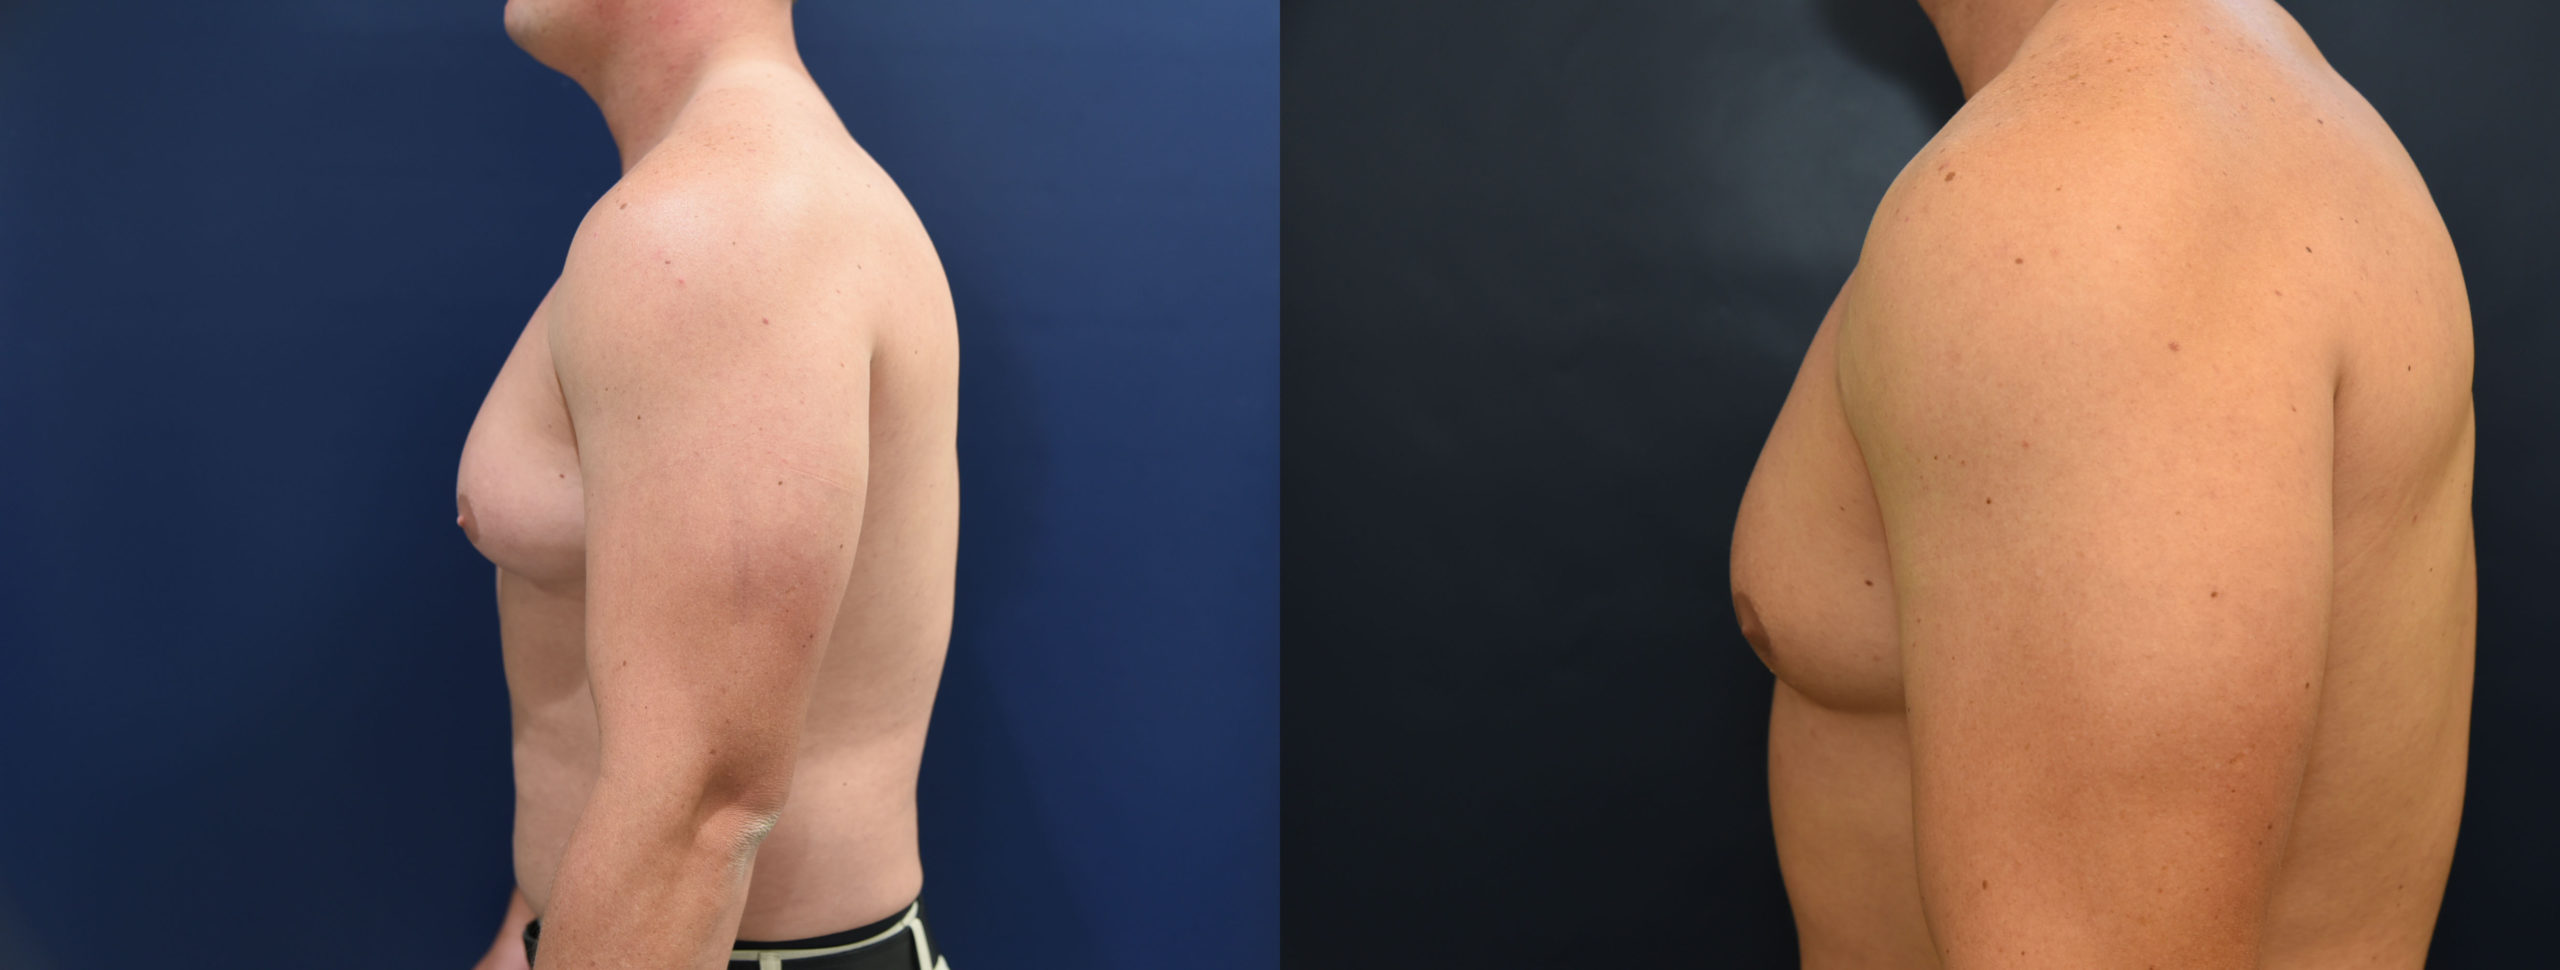 Gynecomastia Before and After Photo by Dr. Butler in Pensacola Florida